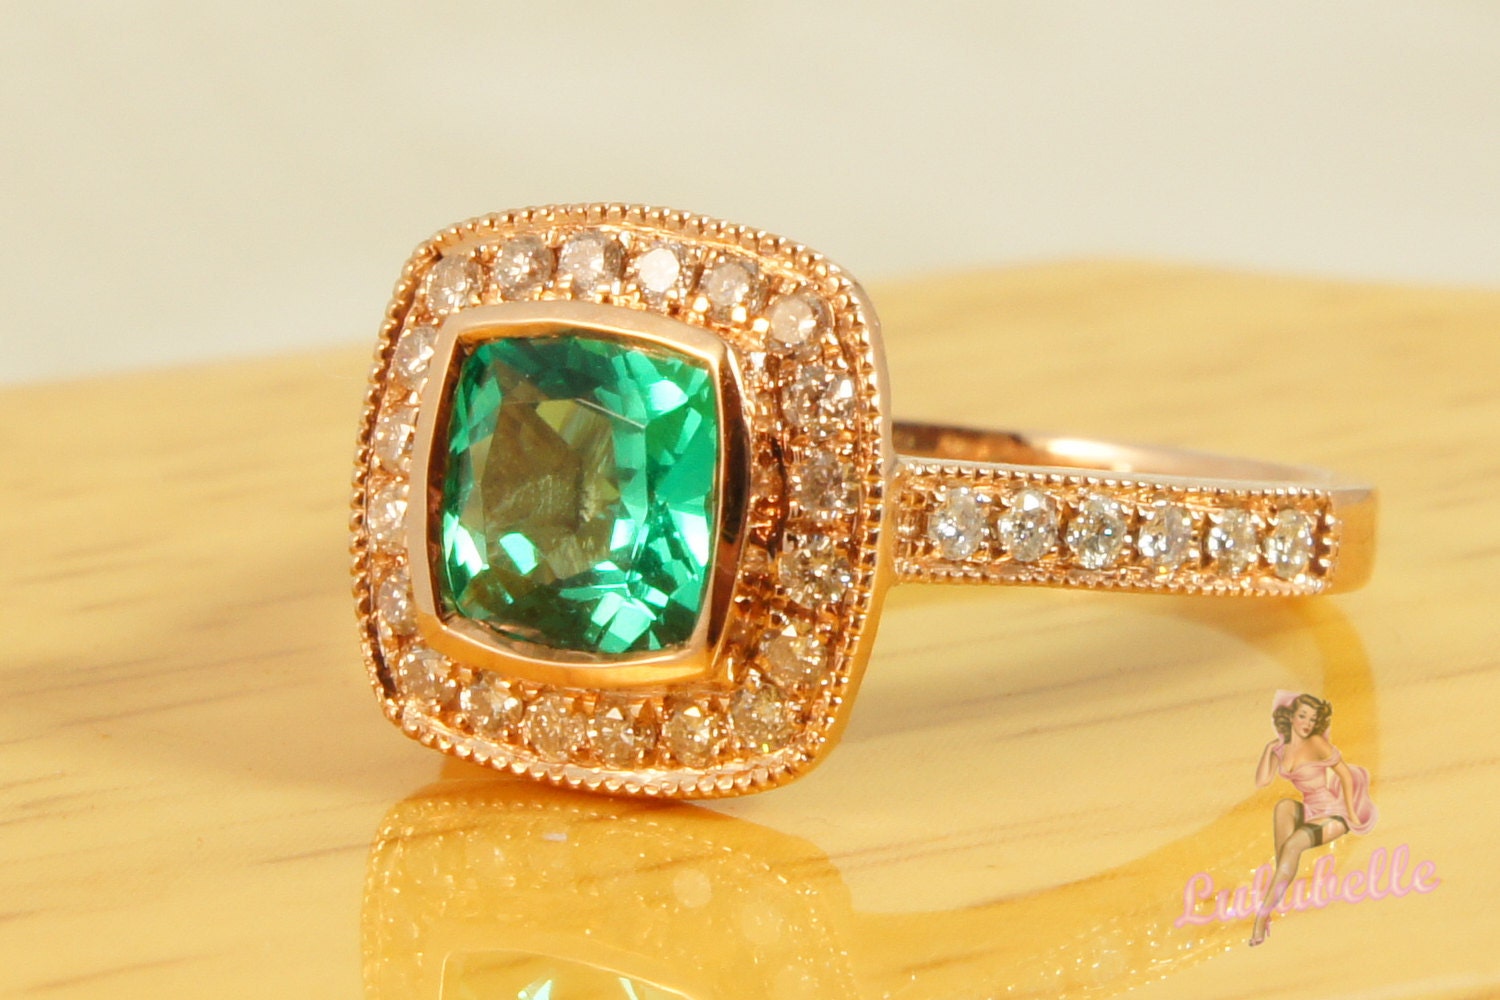 The Simple Legacy - 14k Rose gold with cushion cut green tourmaline and pave diamond engagement or wedding ring